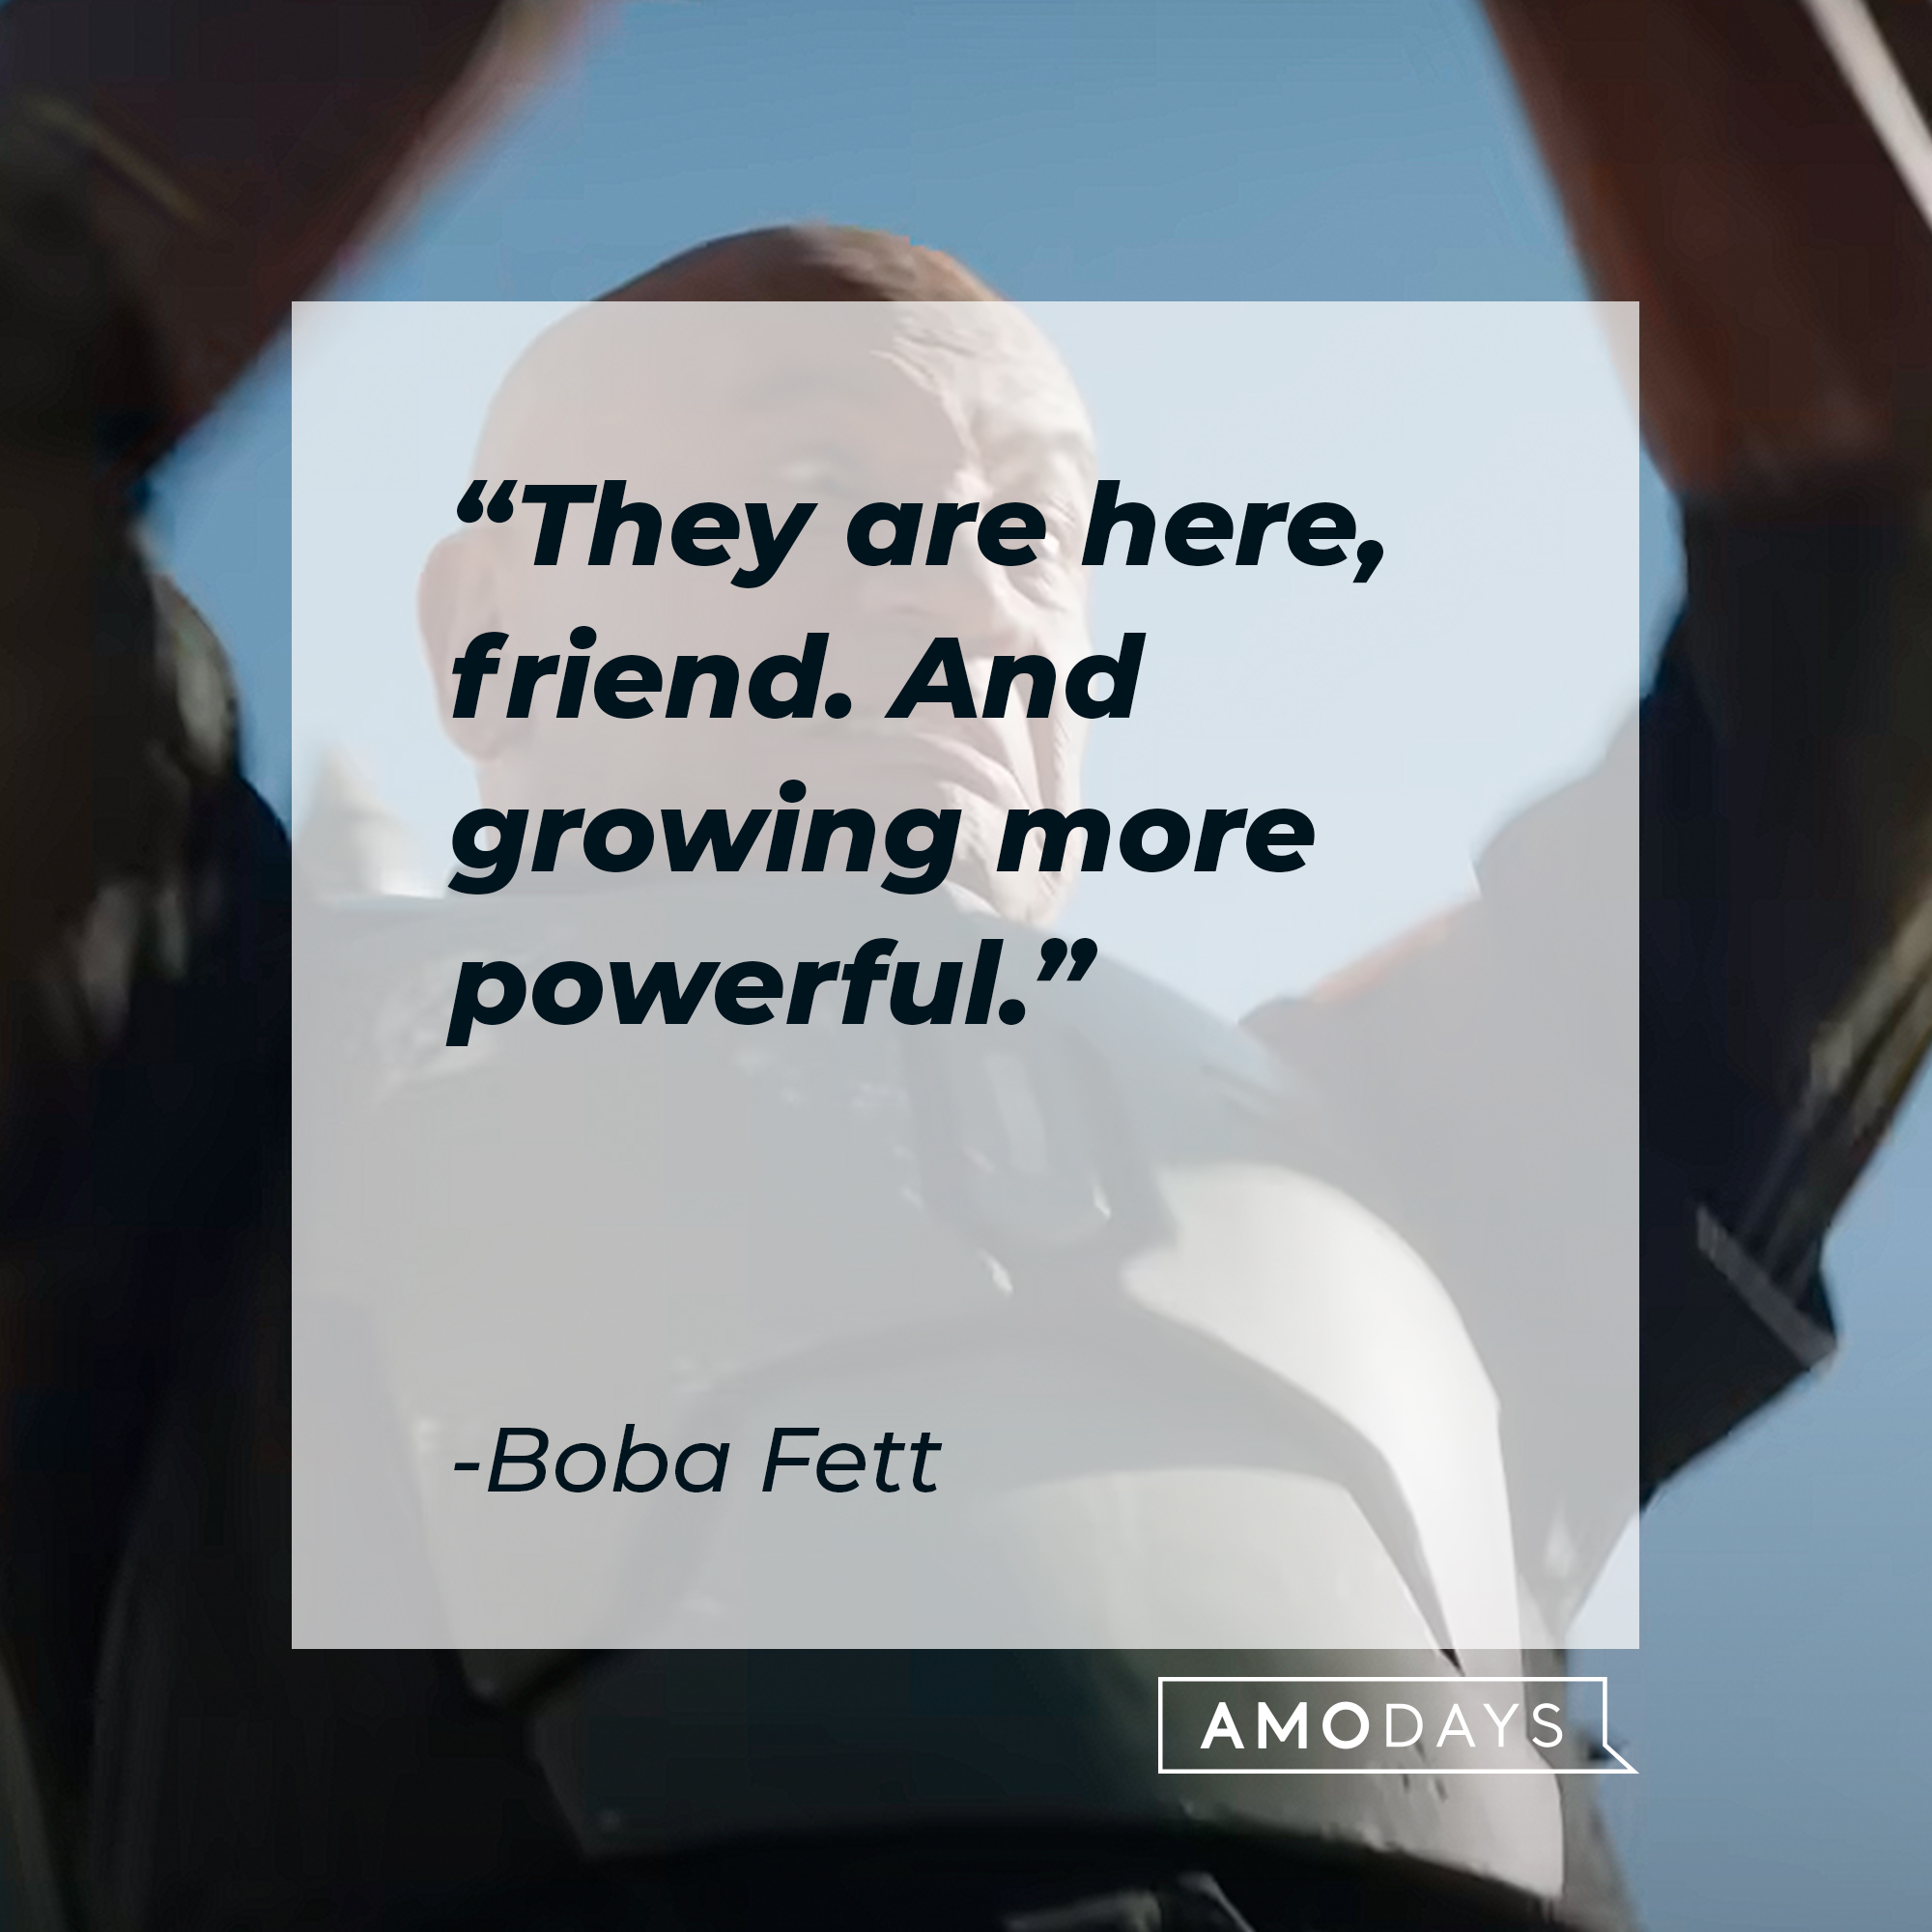 Boba Fett, with his quote: "They are here, friend. And growing more powerful."│ Source: youtube.com/StarWars